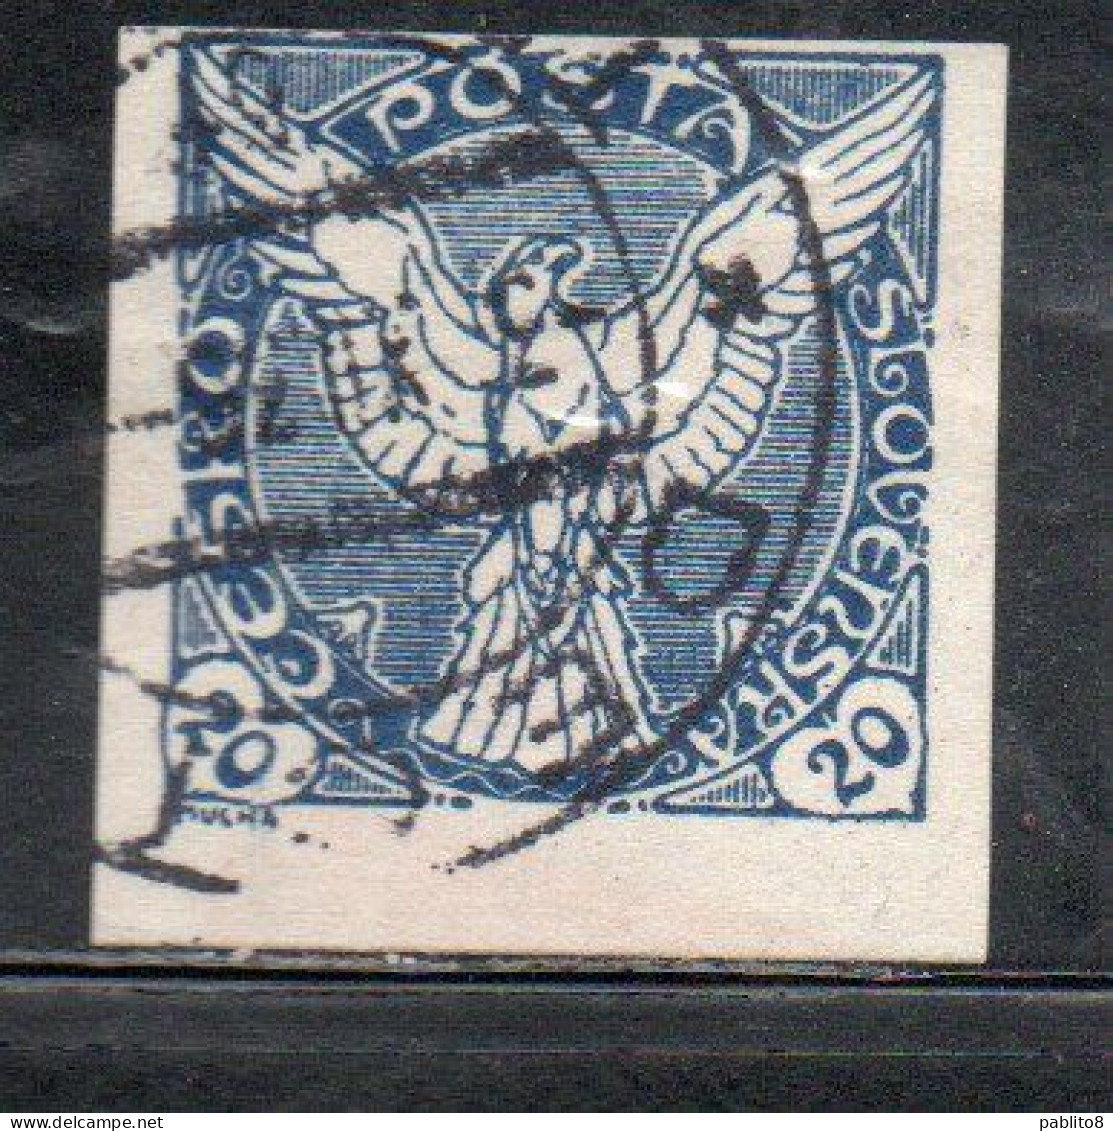 CZECHOSLOVAKIA CESKA CECOSLOVACCHIA 1918 1920 IMPERF. NEWSPAPER STAMPS WINDHOVER 20h USED USATO OBLITERE' - Timbres Pour Journaux